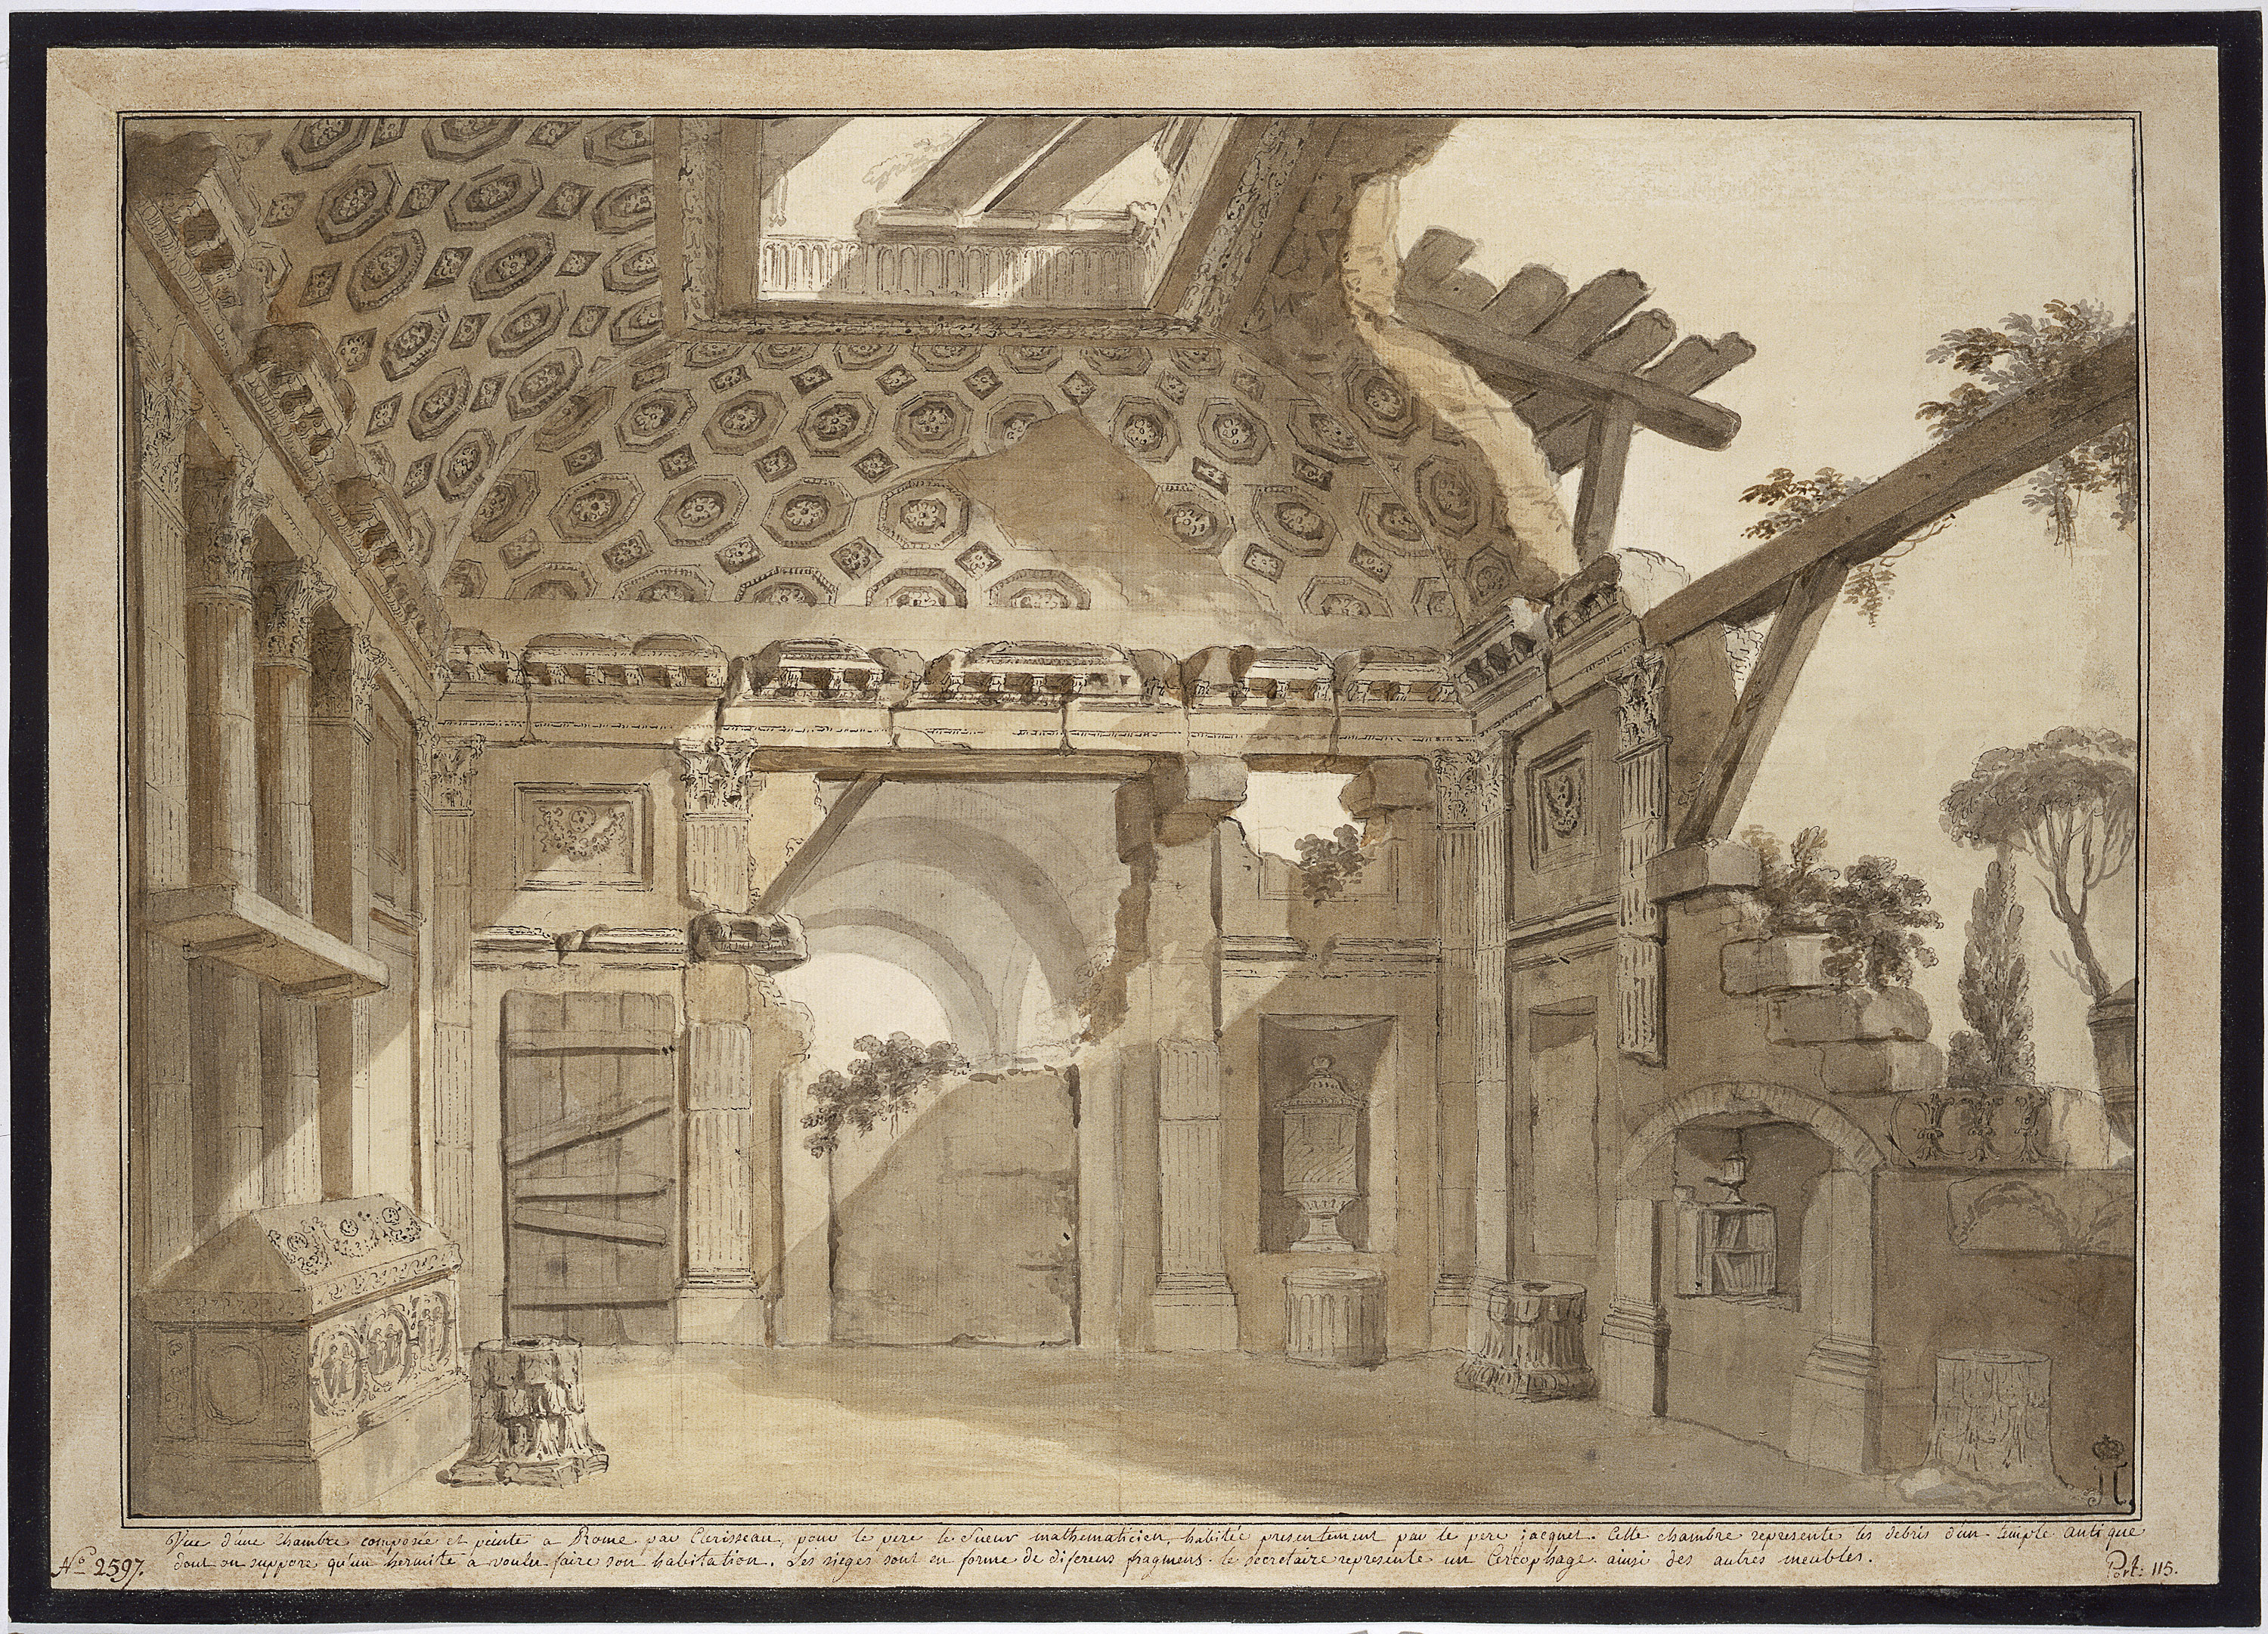 Charles-Louis CLÉRISSEAU (French 1721–1820), Design for the paintings in the cell of Father Lesueur in the Monastery of Santissima Trinità dei Monti in Rome 1766–68, pen and black and brown ink, brown and grey wash, 36.9 x 53.0 cm (sheet), State Hermitage Museum, St Petersburg (Inv. no. ОР-2597). Acquired from the artist by Catherine II on 5 May 1780, Provenance: before 1797